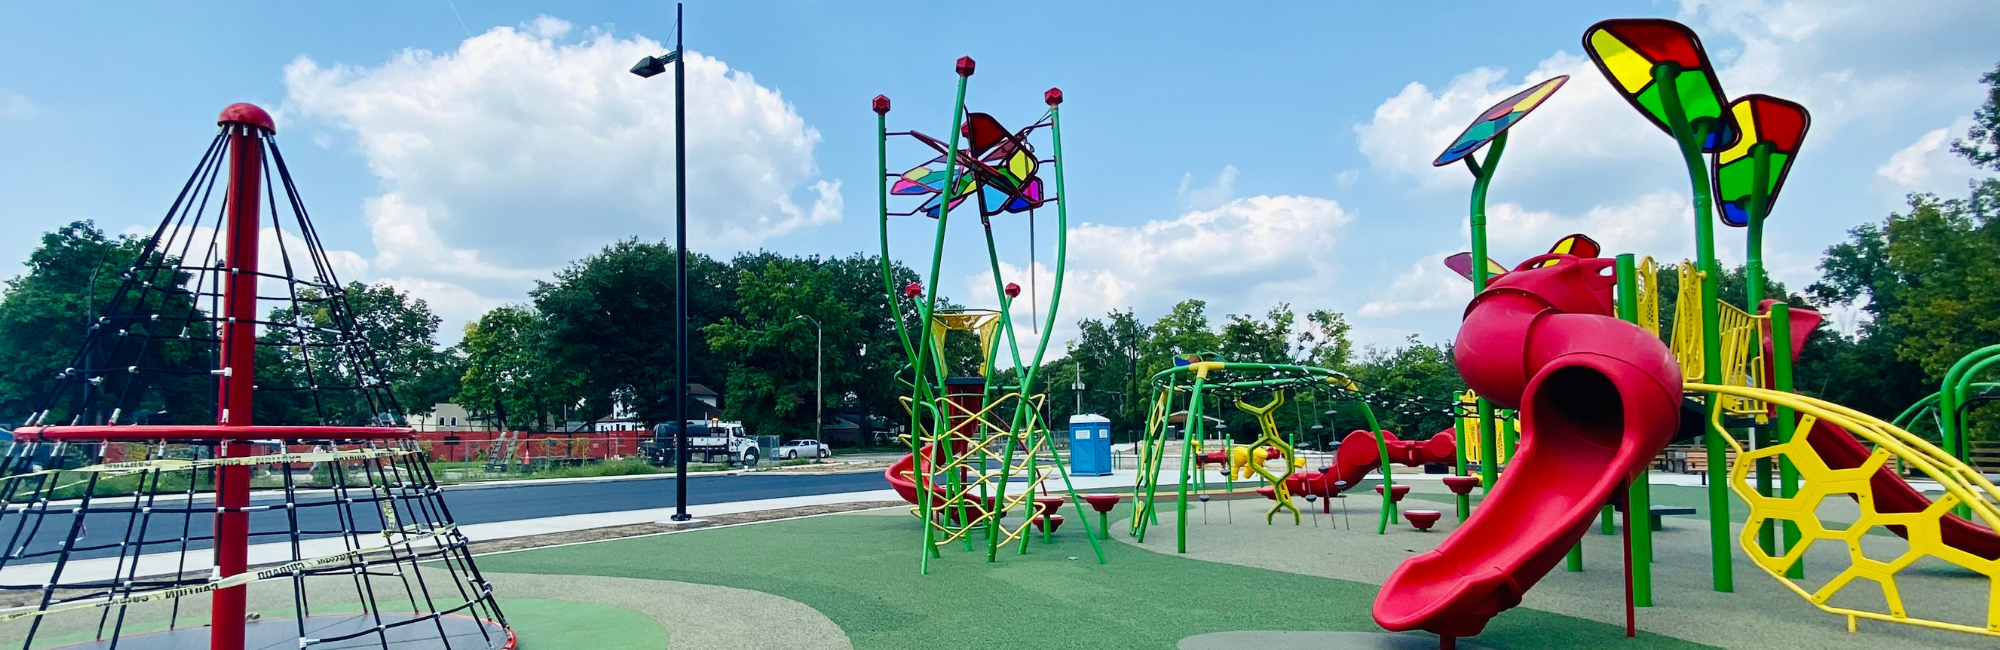 park playground with vibrant features